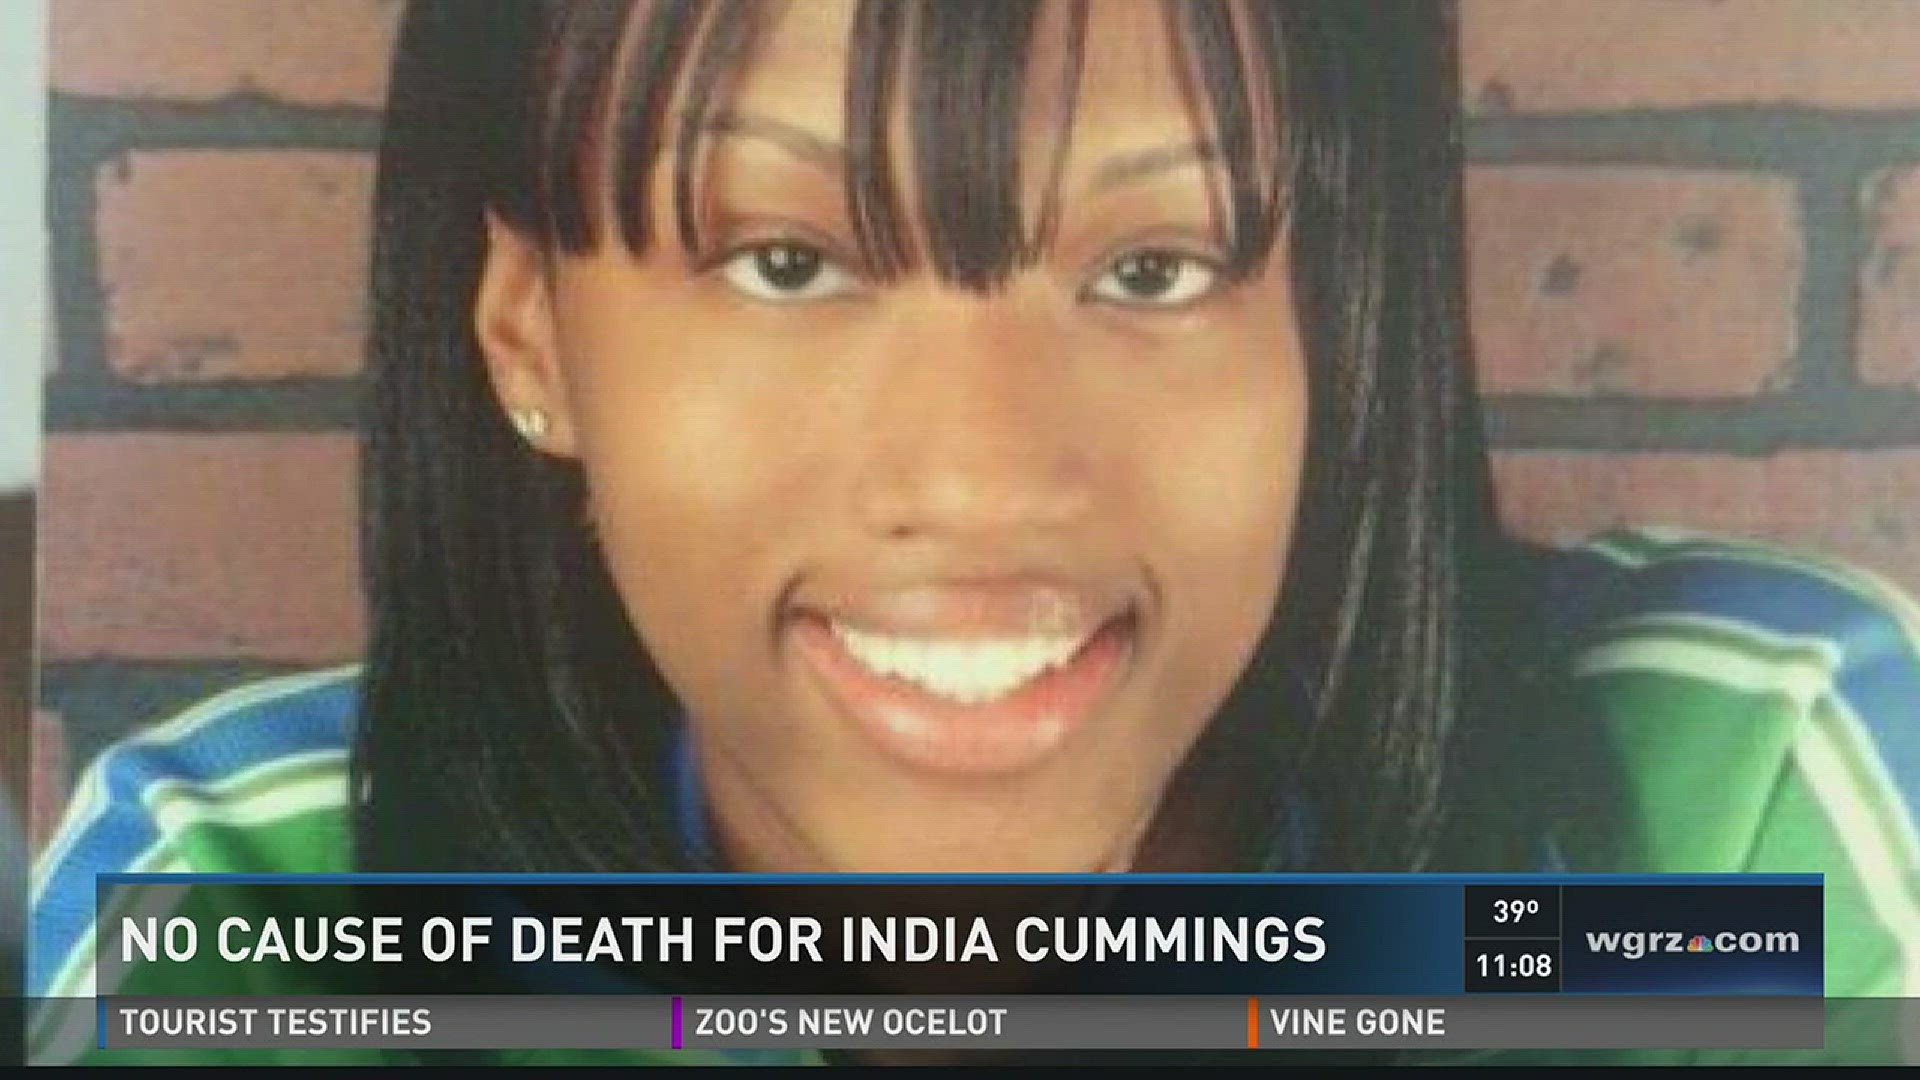 No Cause Of Death For India Cummings